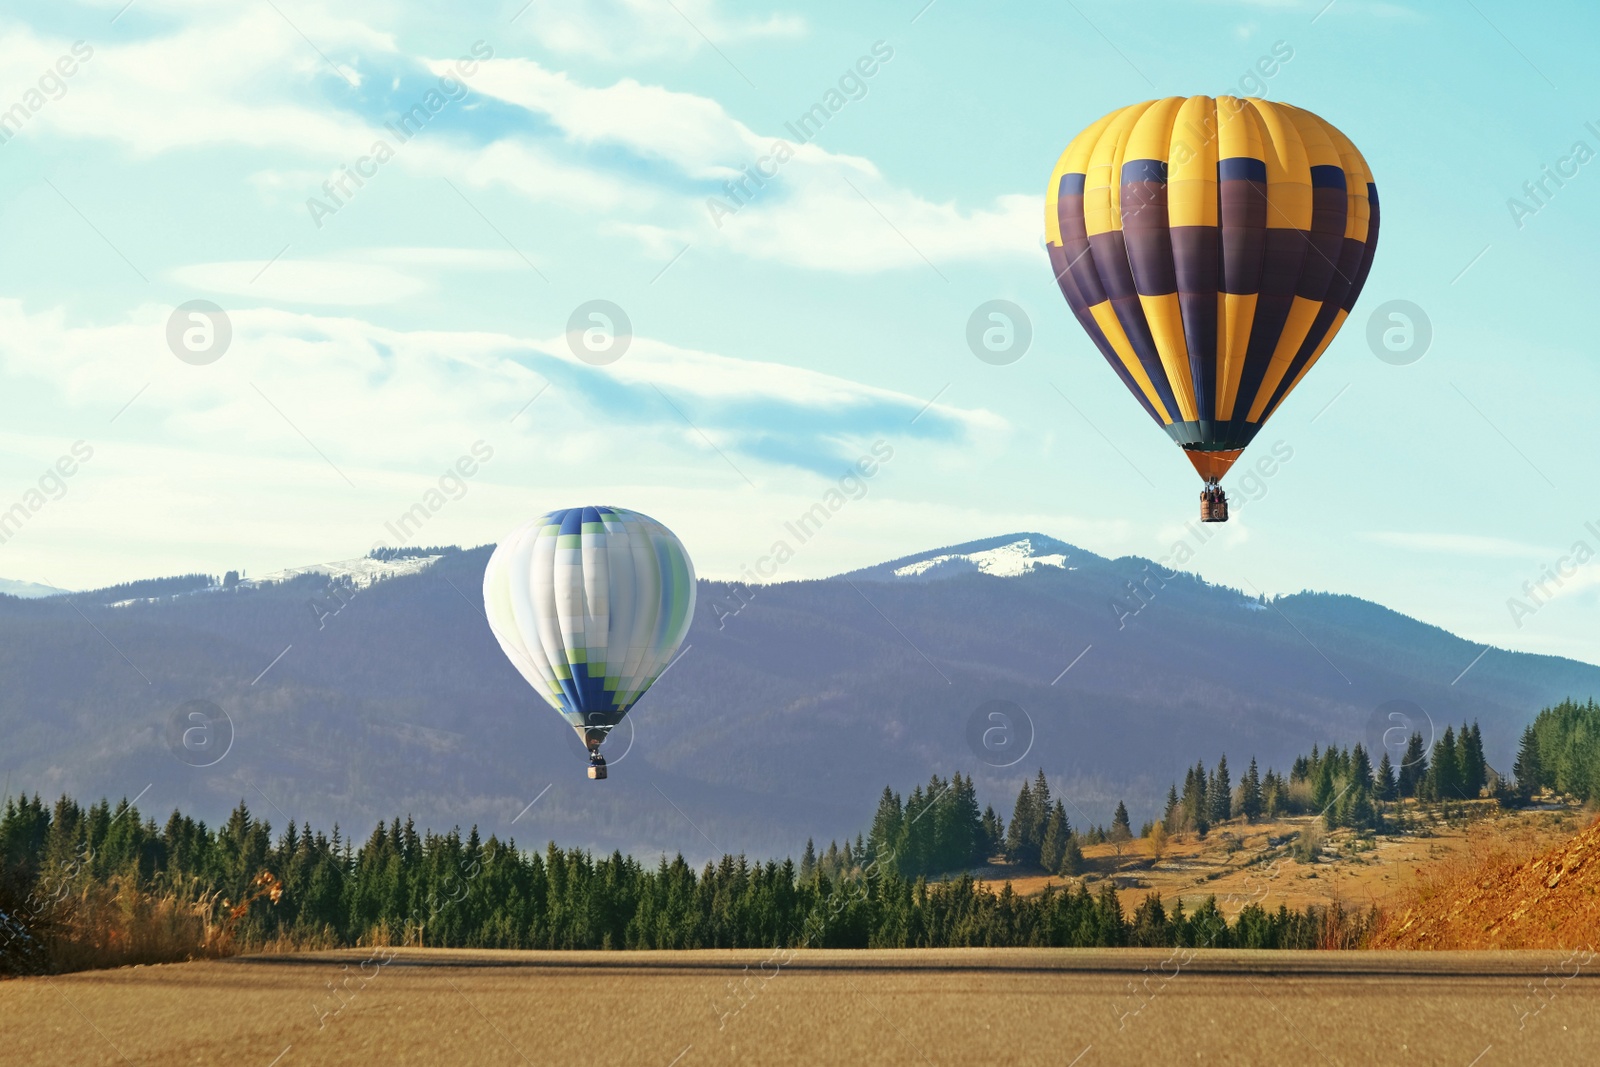 Photo of Hot air balloons flying near forest and mountains